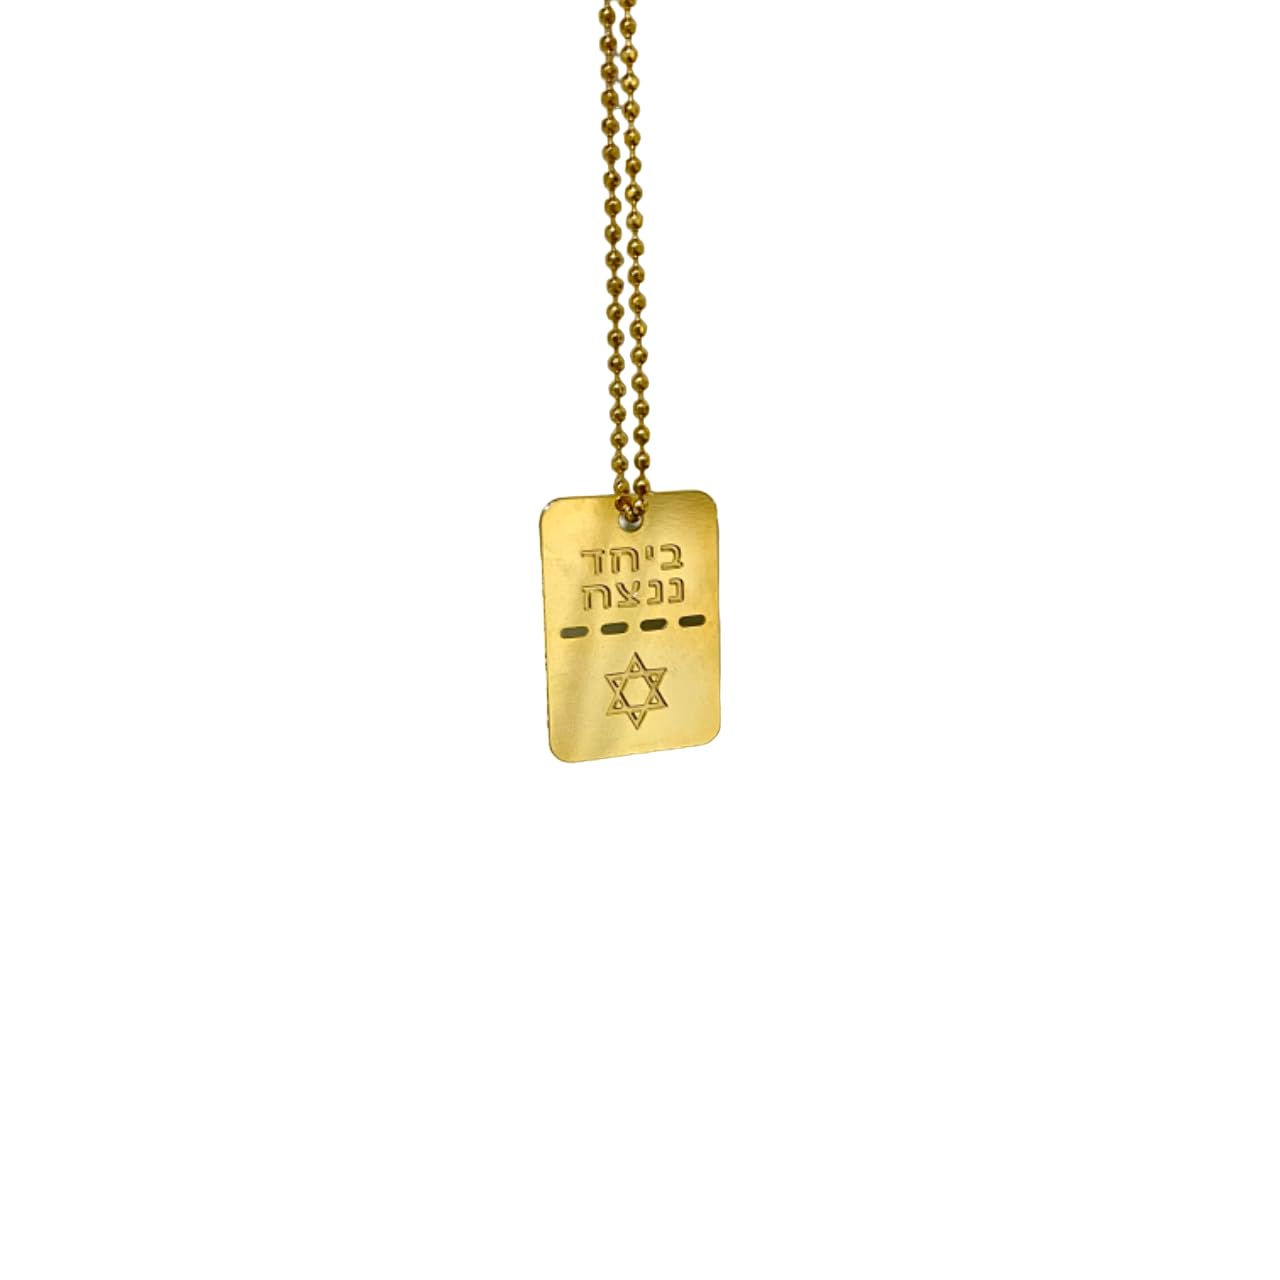 18K Gold Plated Bring Them Home Now Two Sides Tag Handmade Necklace Jewelry Women Men Unisex Chain Israel military necklace Stand with the kidnapped kids and people of Israel Support Israel I Stand